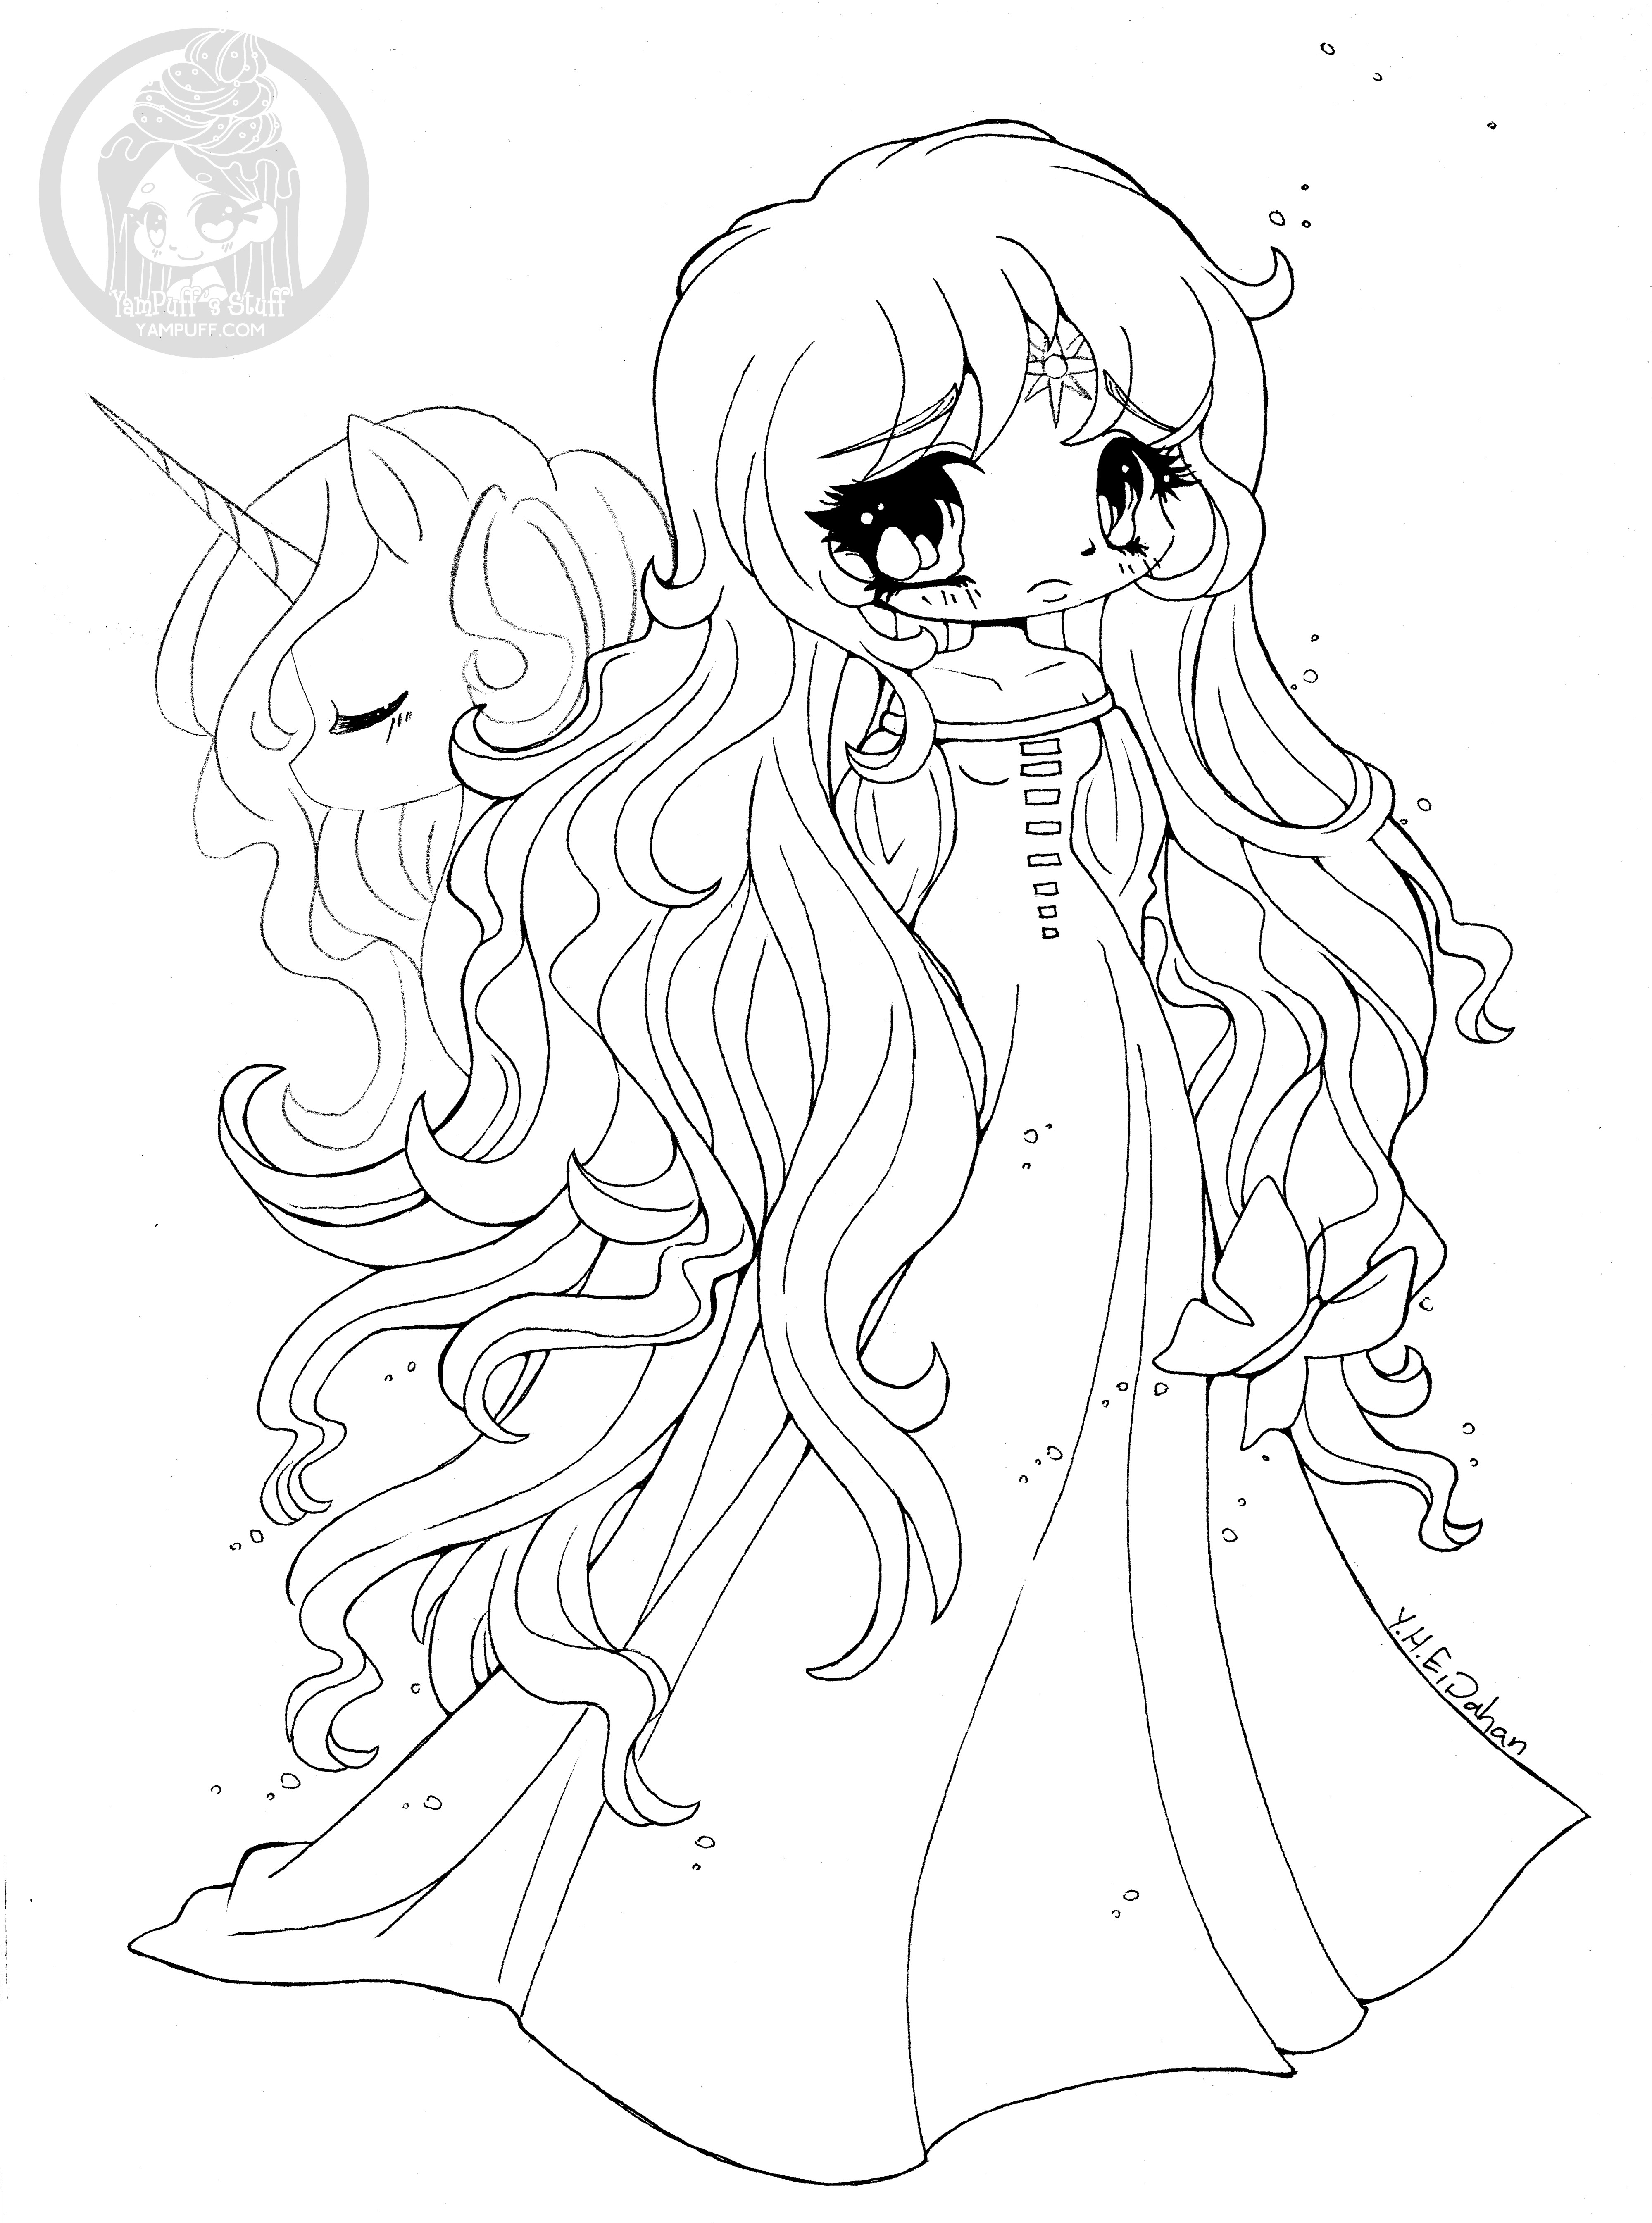 Unicorn Girl Coloring Pages
 Fanart Free Chibi Colouring Pages • YamPuff s Stuff